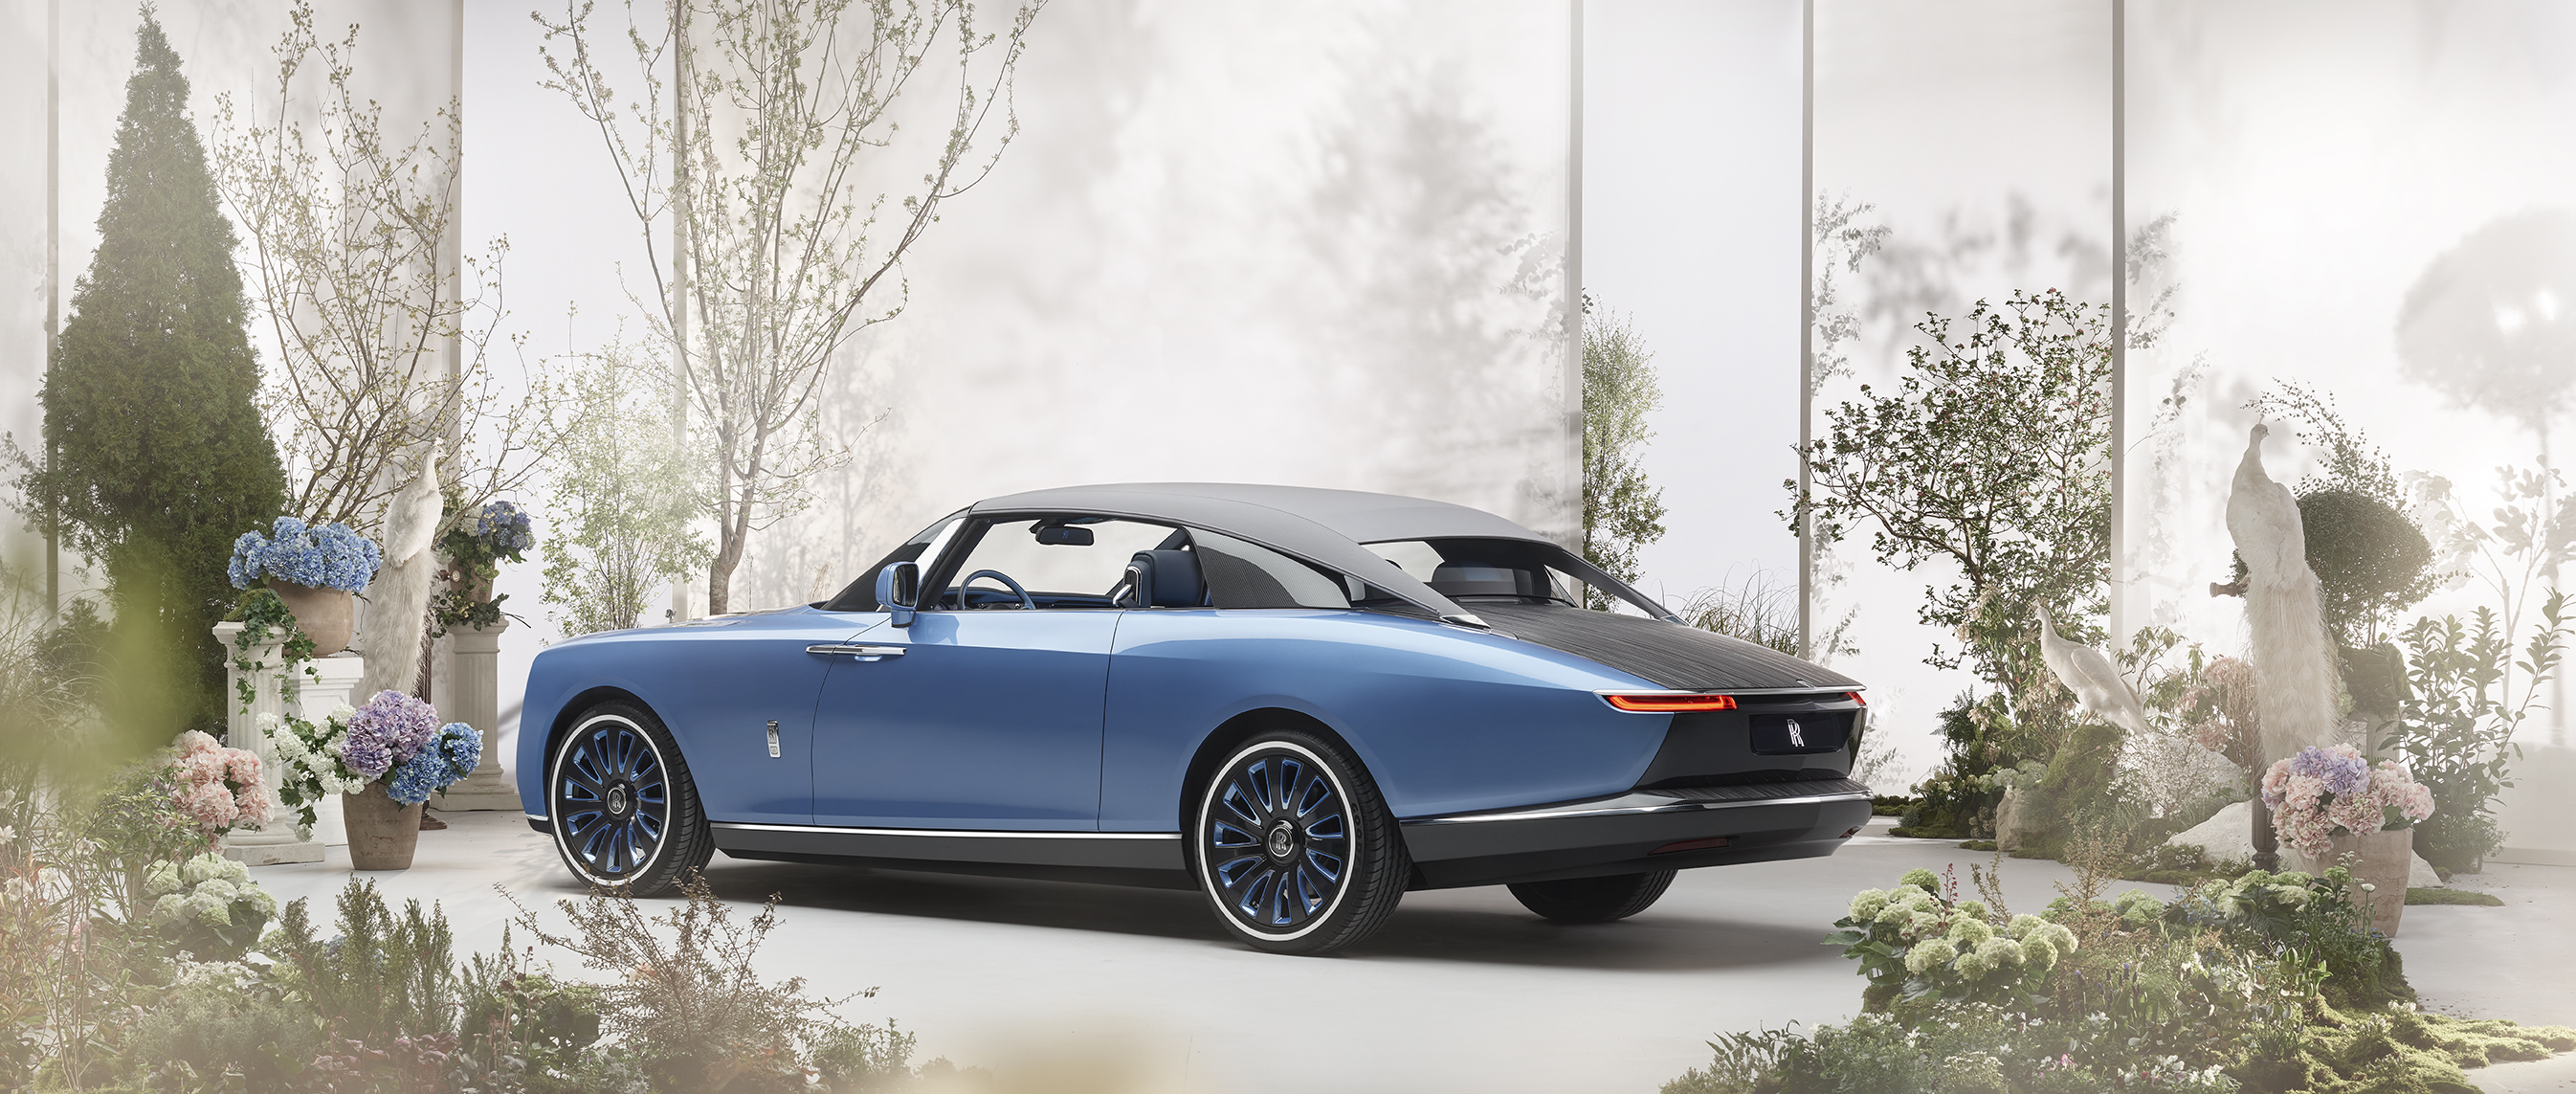 Design your own RollsRoyce with new Coachbuild division  Wallpaper